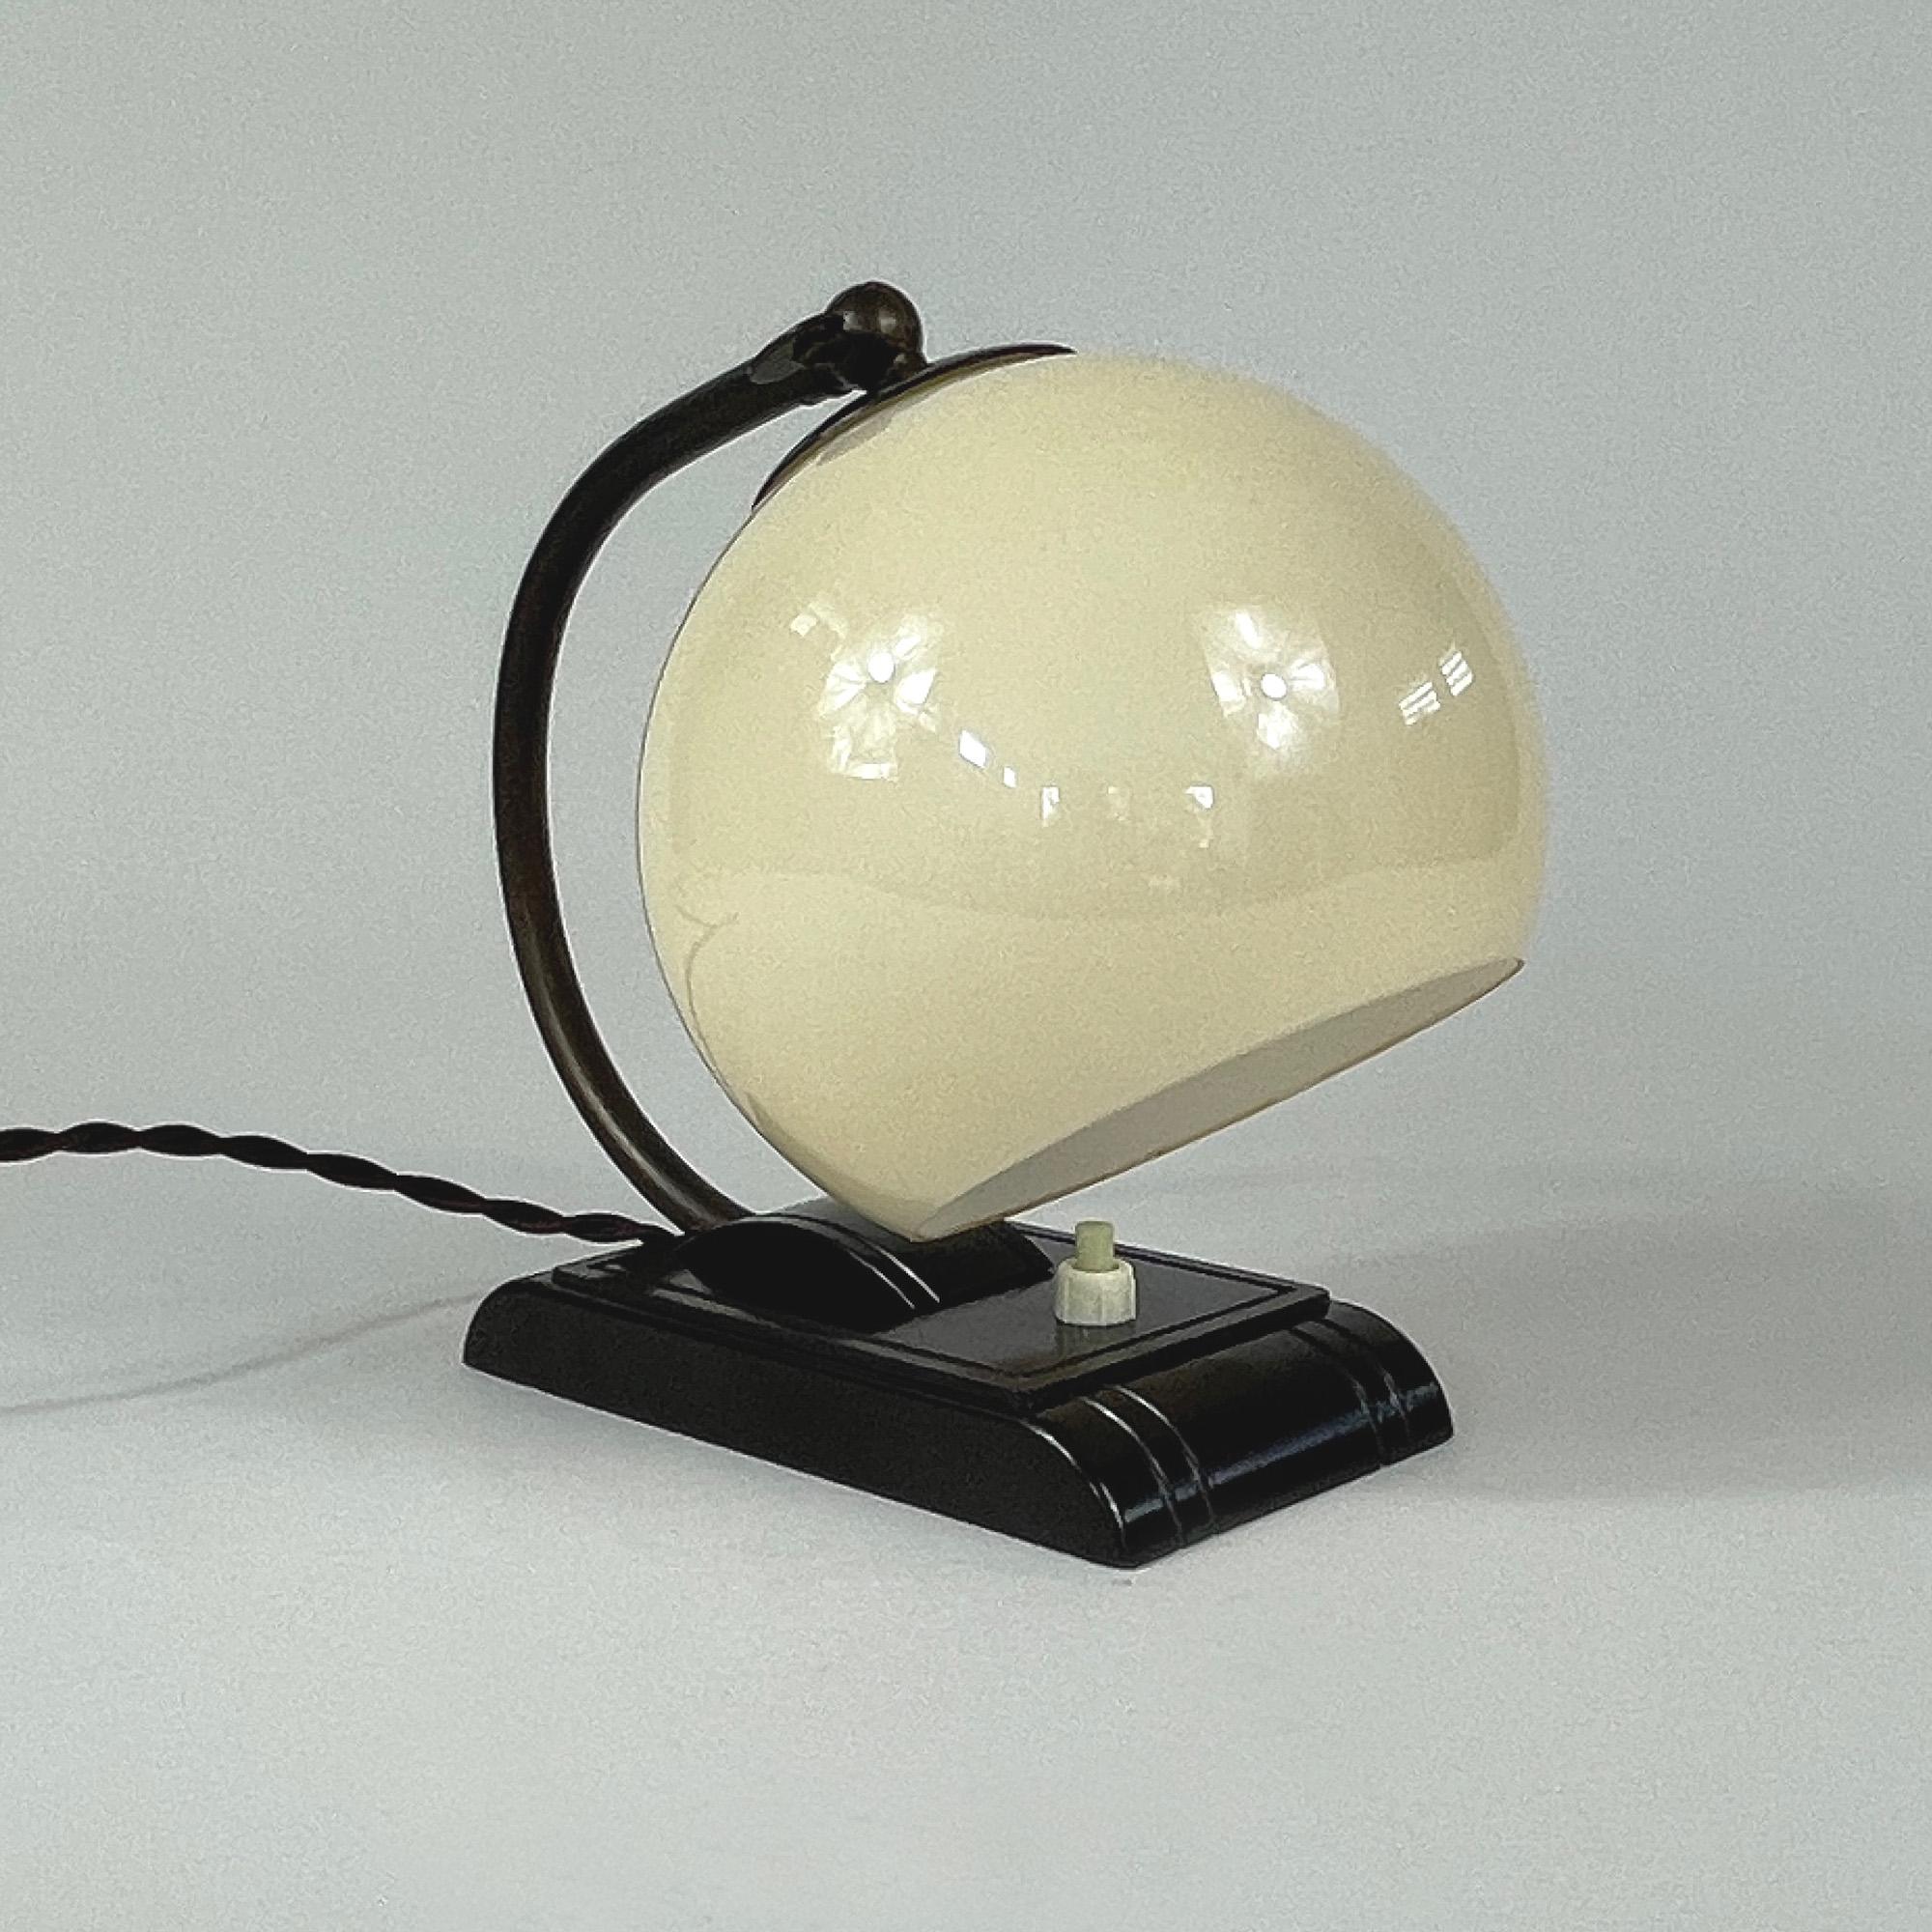 This unusual vintage table or bedside lamp was designed and manufactured in Germany in the 1920s-1930s during the Bauhaus period. It is made of bronzed brass, has got an adjustable lamp shade in ivory colored opaline glass and a dark brown shiny